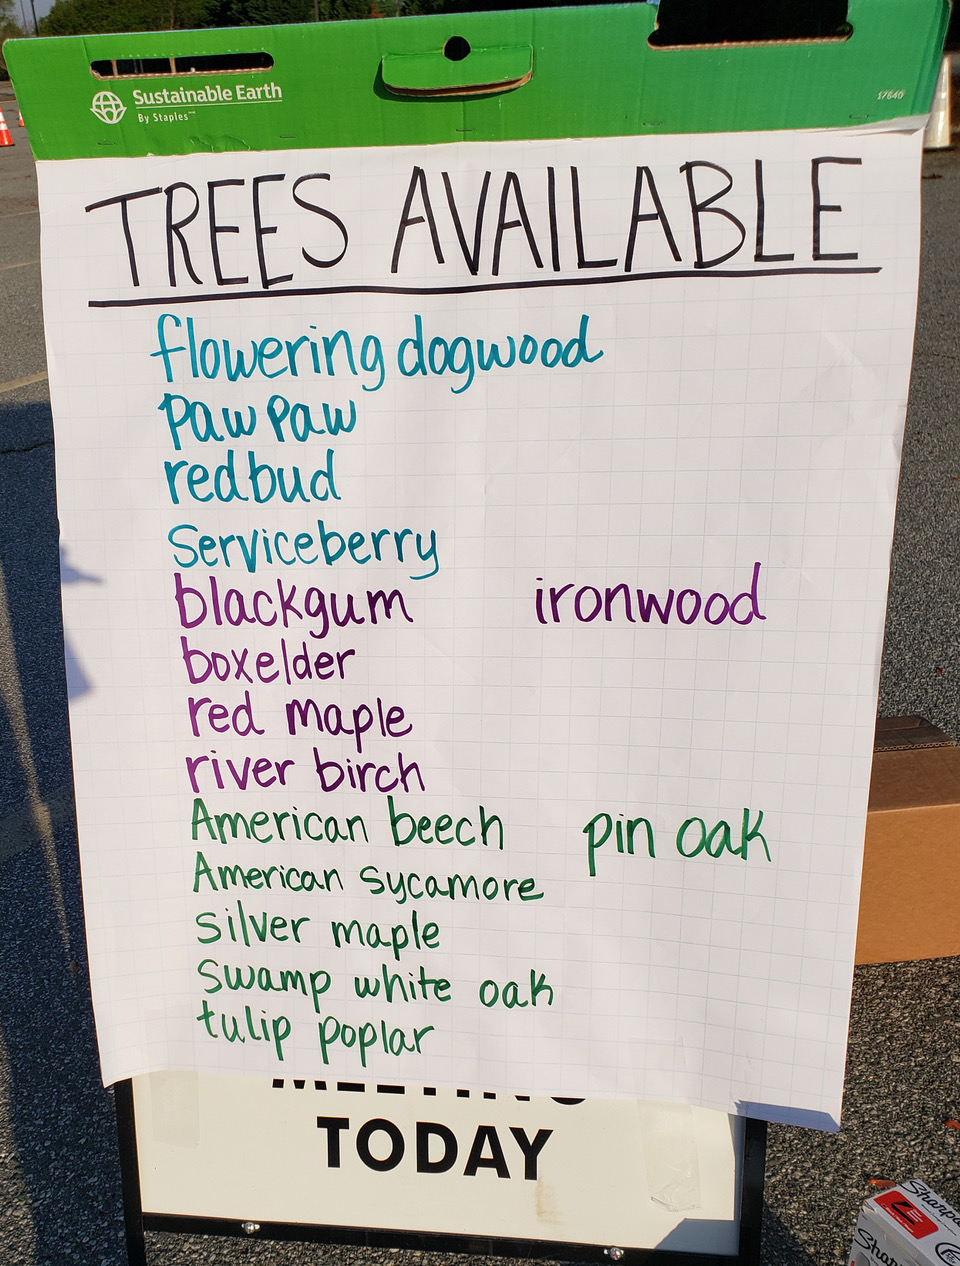 A list of flowering trees for replacement of Bradford Pears